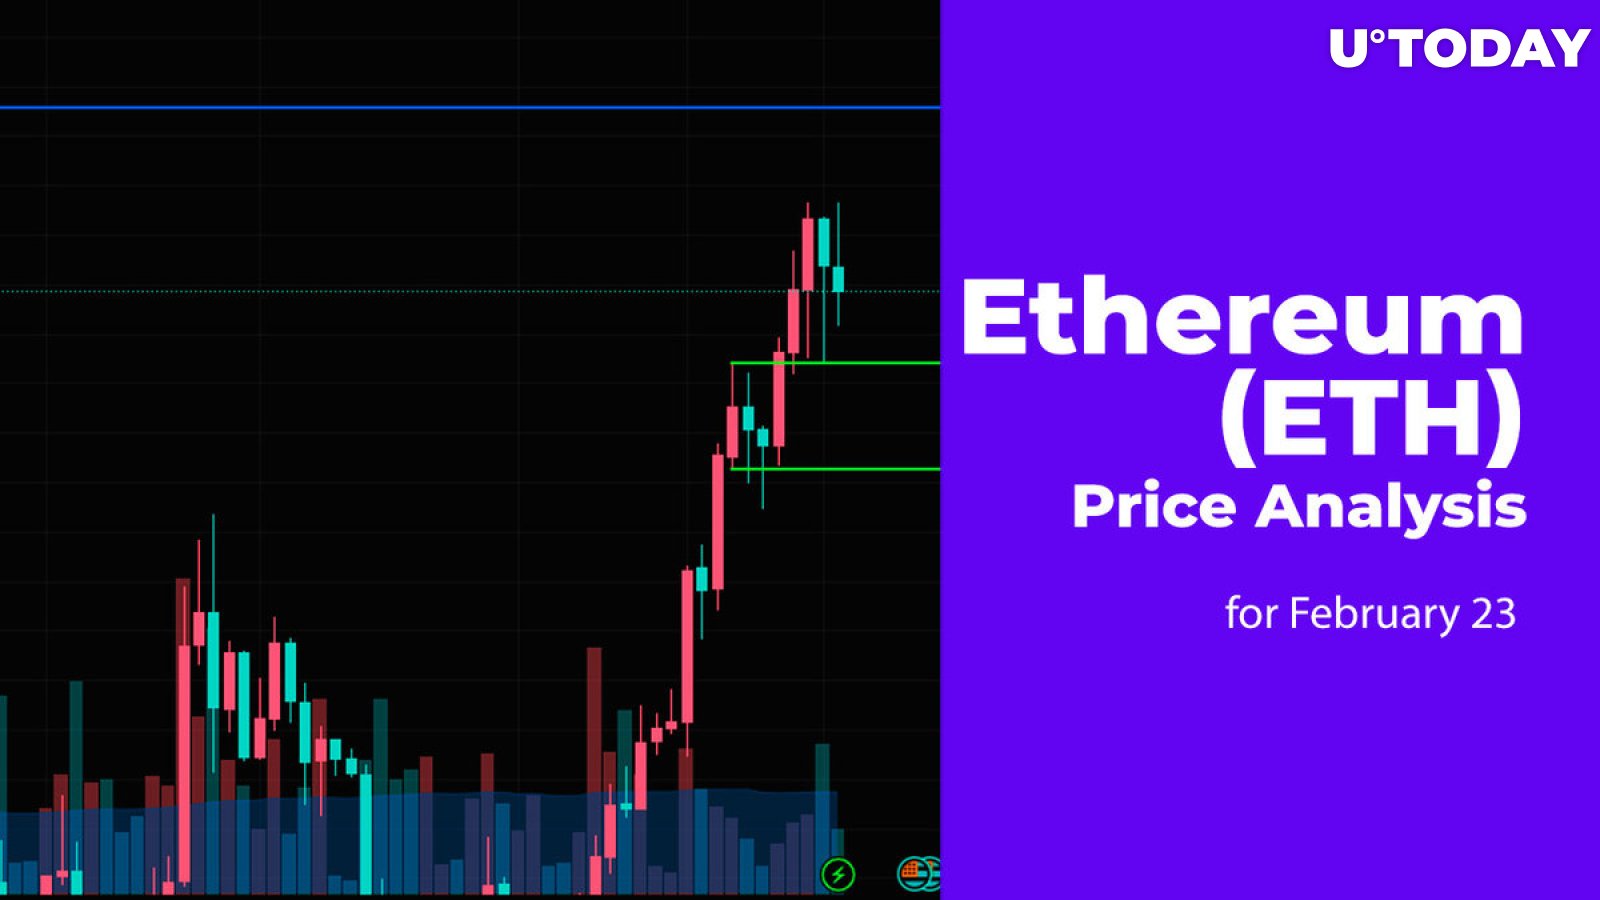 Ethereum (ETH) Price Prediction for February 23